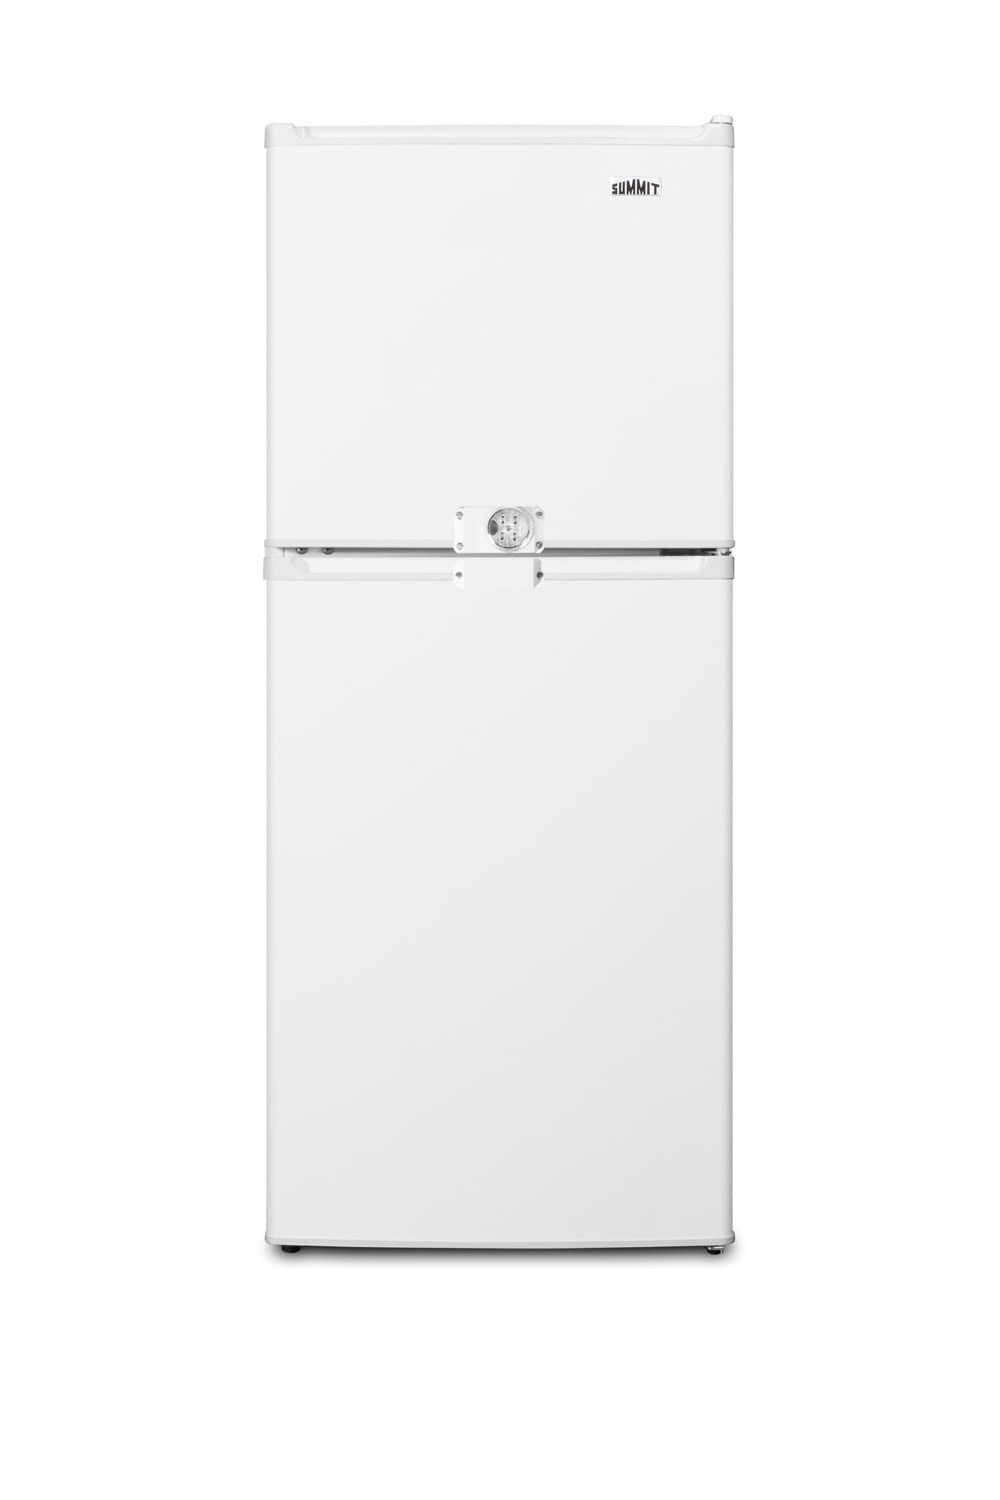 Best No Frost Refrigerator Combination: Top Picks for Frost-Free Cooling